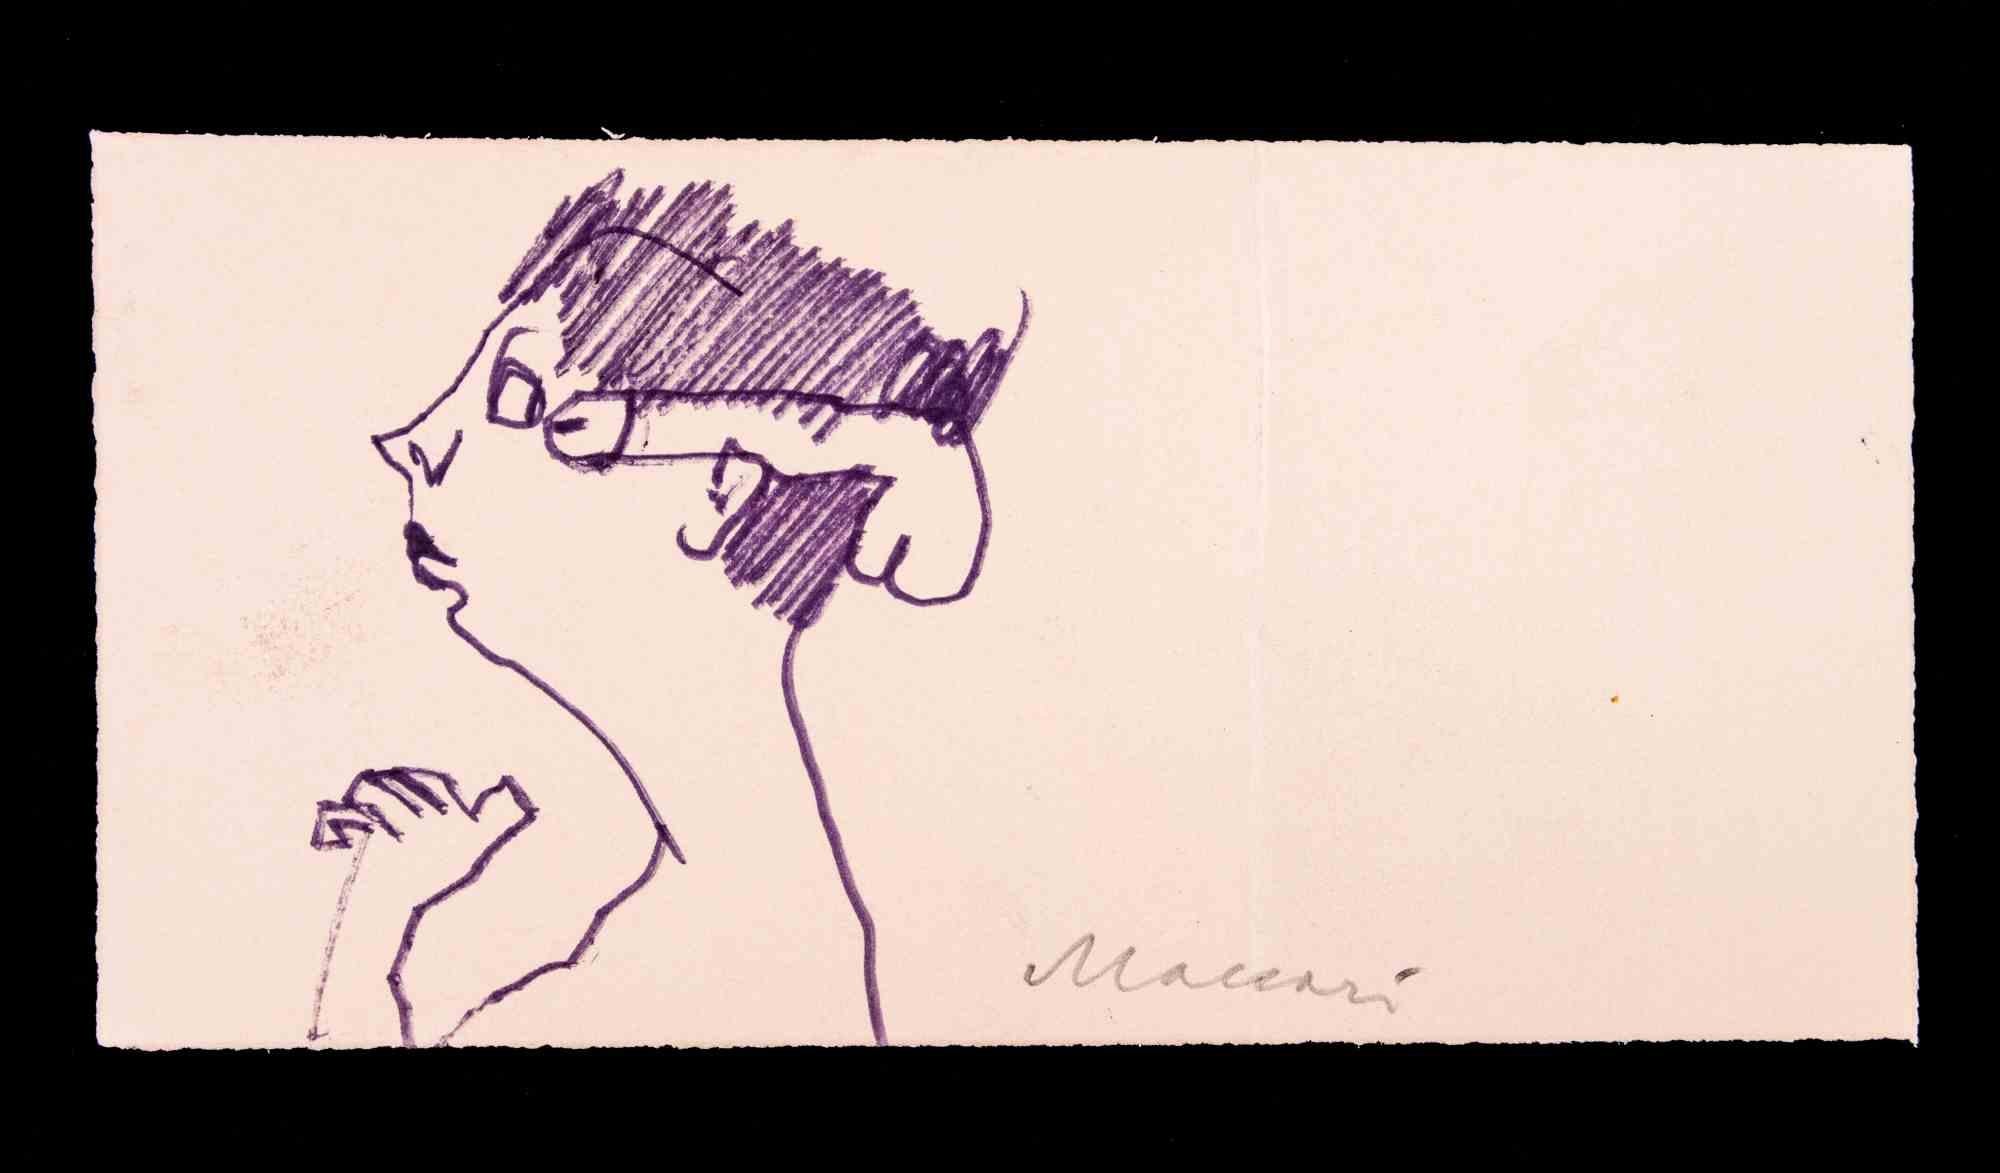 Woman's Profile  is a violet marker Drawing realized by Mino Maccari in 1970.

Hand-signed in the lower margin.

Good condition on a little yellowed cardboard.

Mino Maccari (Siena, 1924-Rome, June 16, 1989) was an Italian writer, painter, engraver